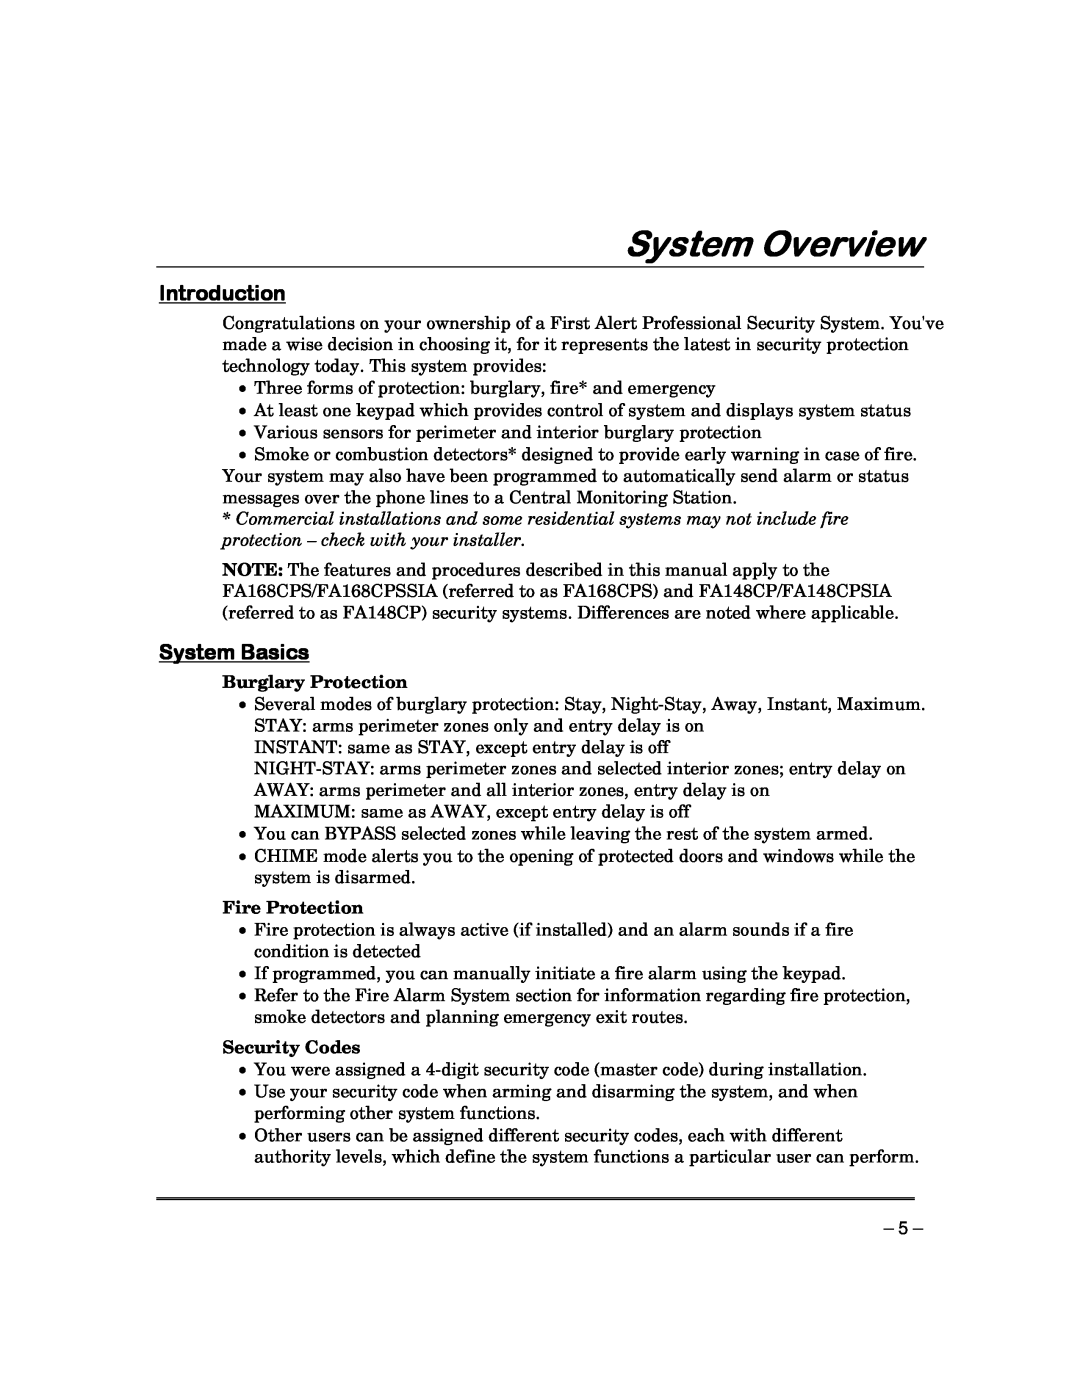 Garmin FA168CPS manual System Overview, Introduction, System Basics 